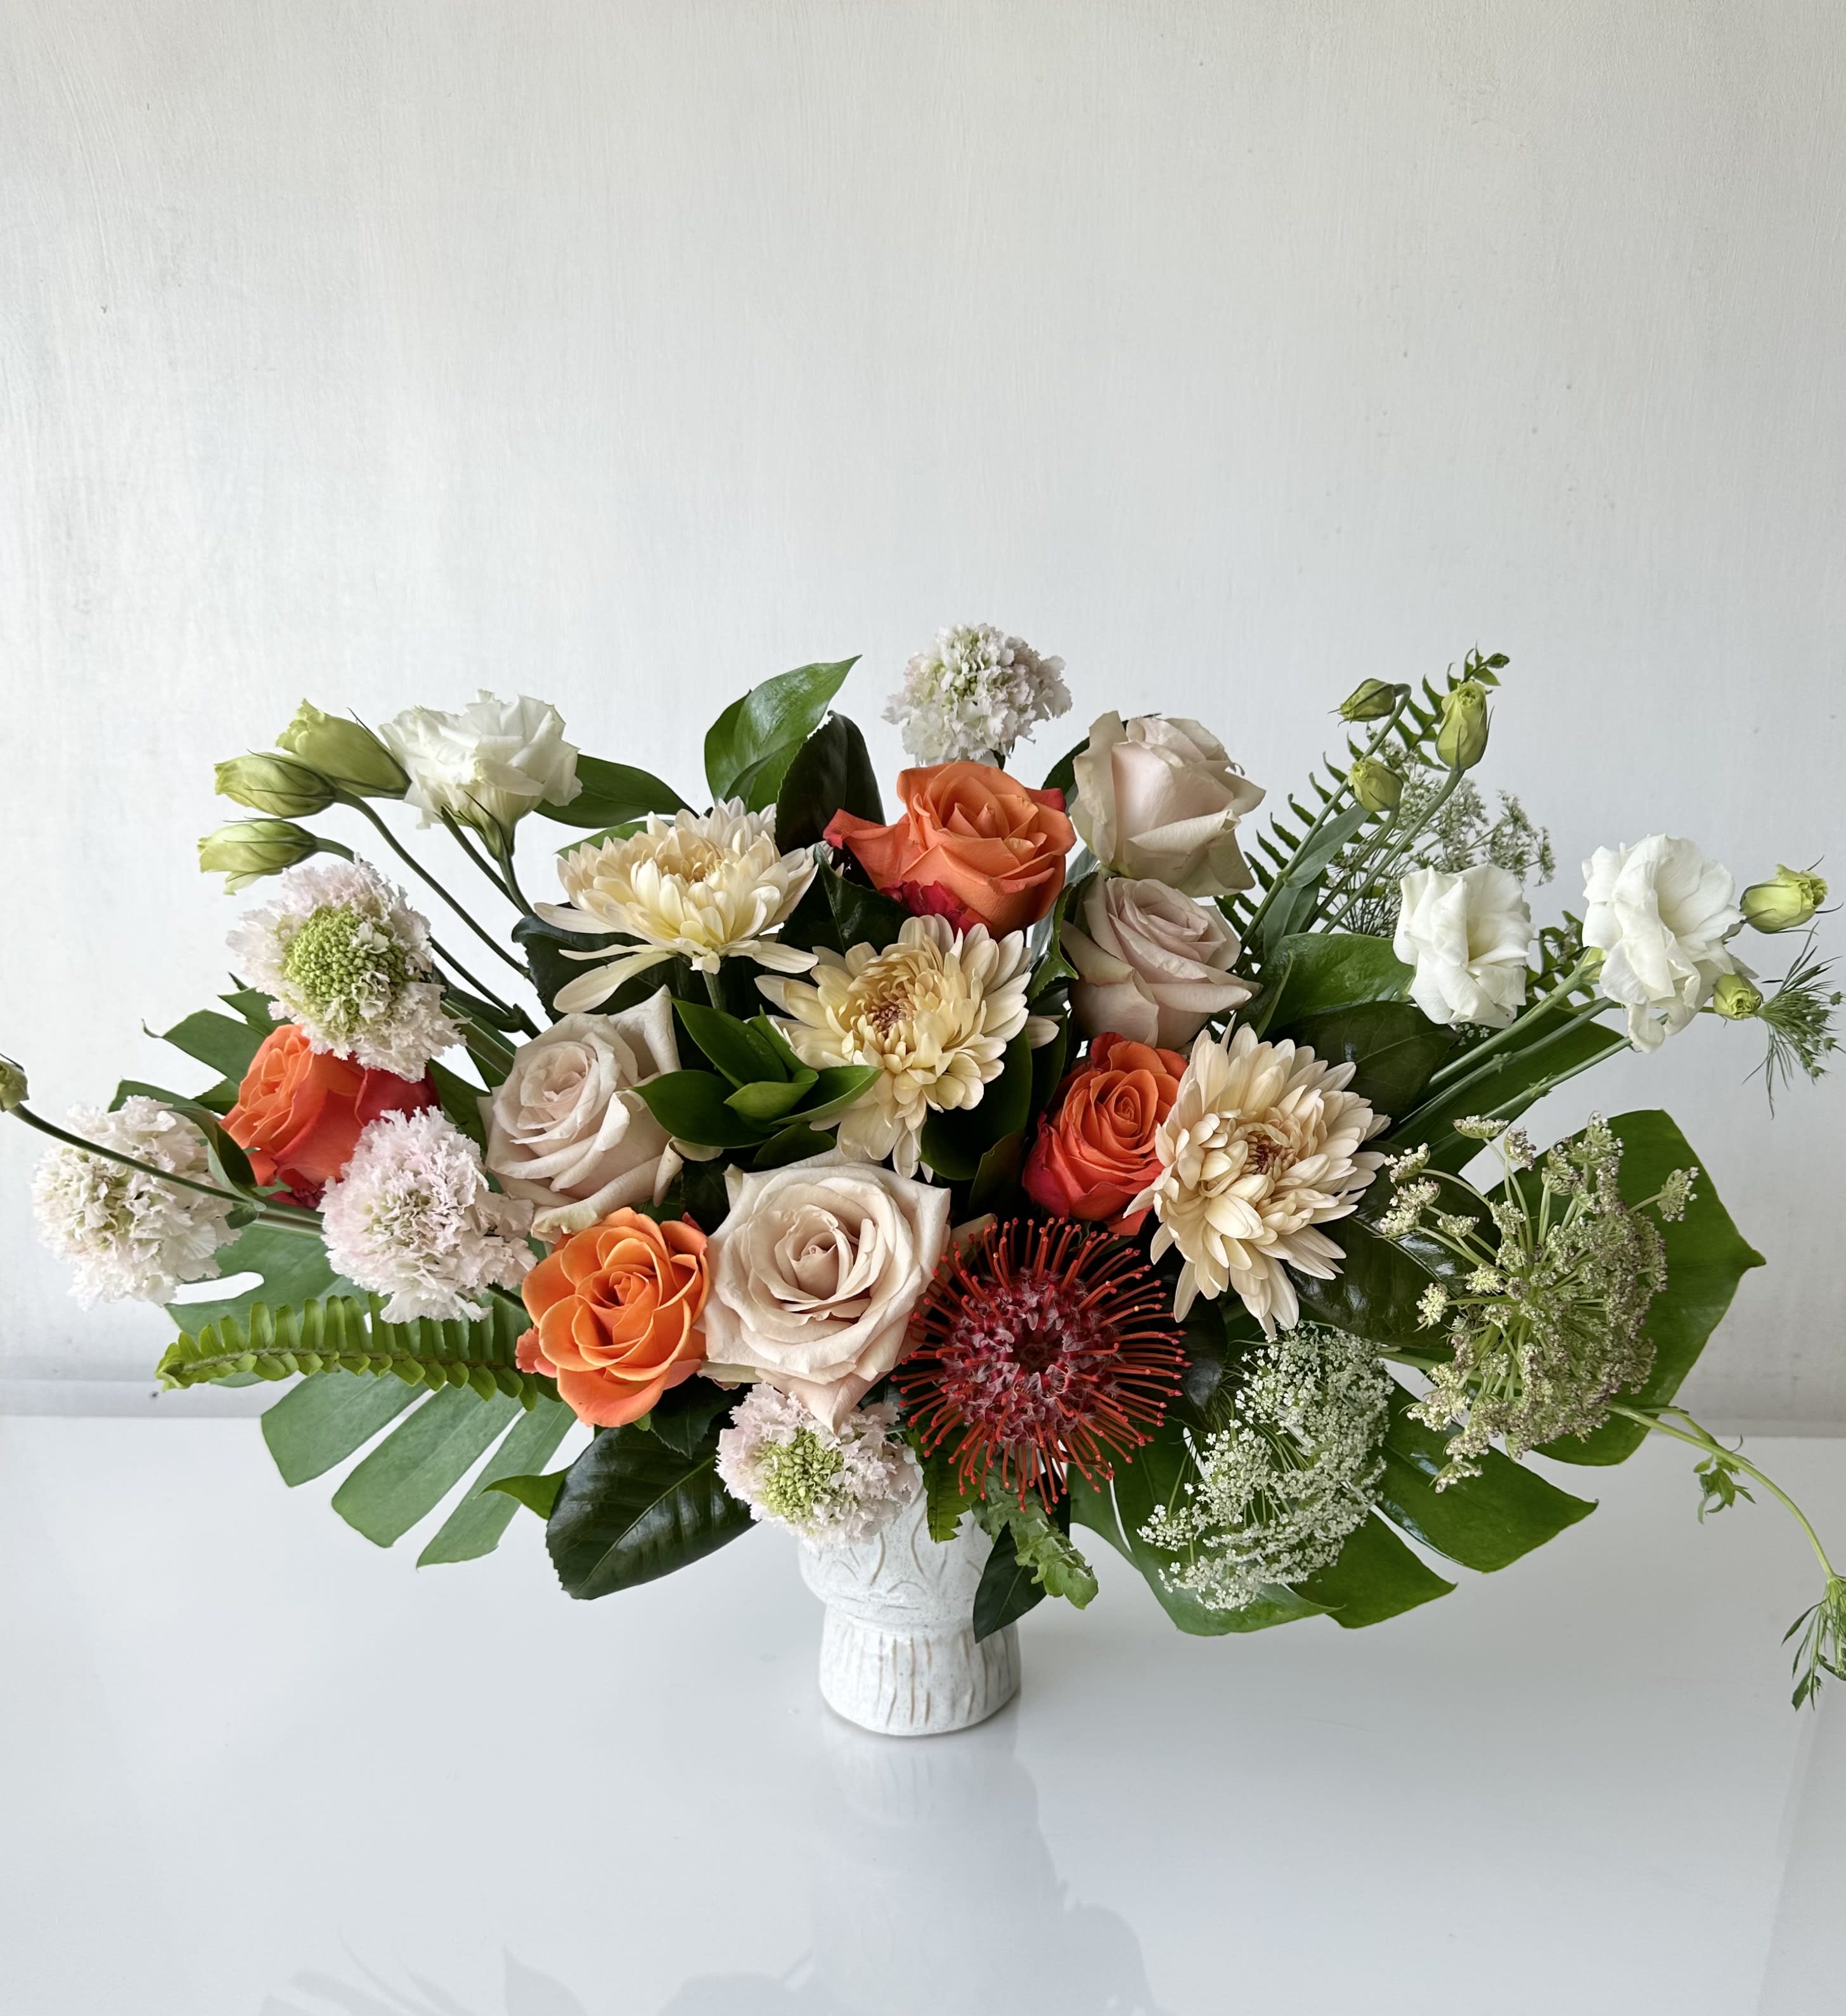 Nature's Bounty - An arrangement of fresh cut flowers includes roses, scabiosa, pin cushion, Cremon, spray roses, lisianthus, queen ann's lace, and premium greenery.  Dimensions: Approximately 18&quot; H x 24&quot; W